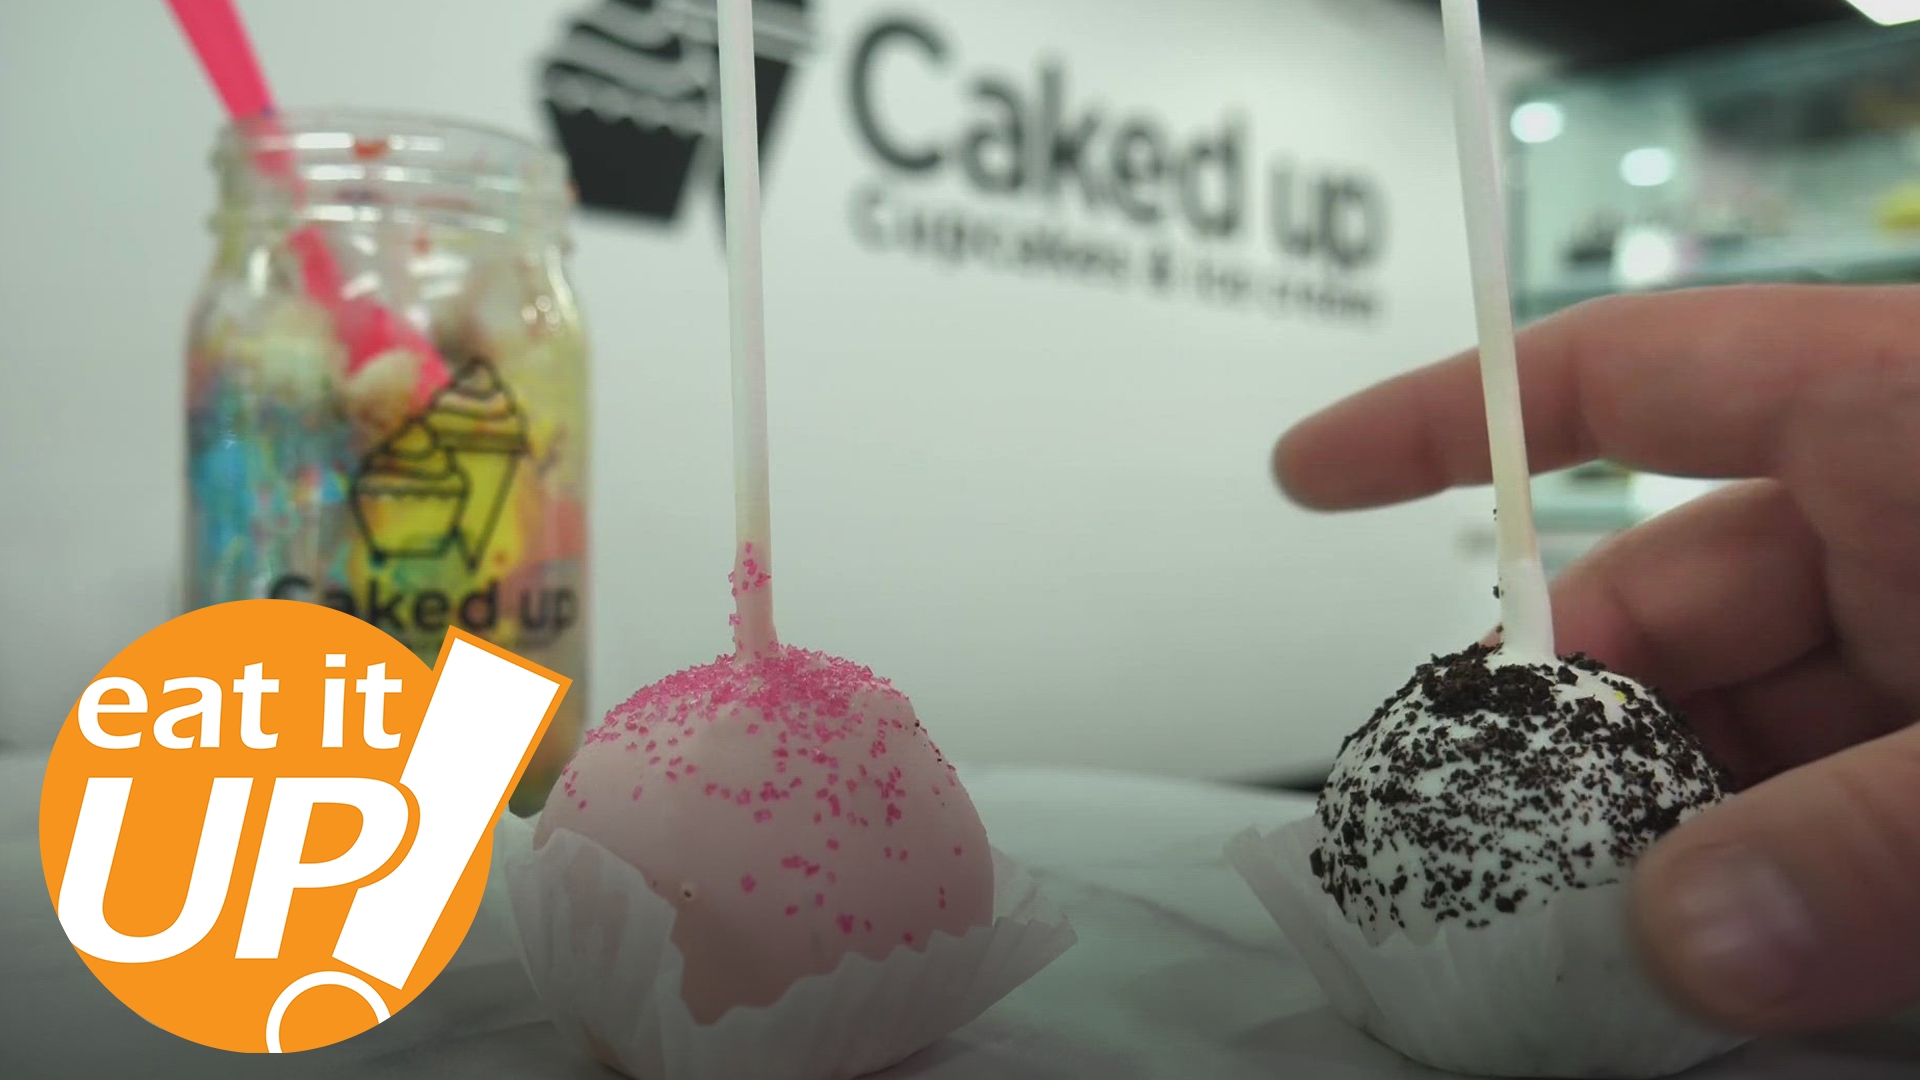 On this week's Eat It Up, Hayden Balgavy visits Caked Up, a dessert shop in Little Rock's Heights district that's sure to satisfy your sweet tooth.